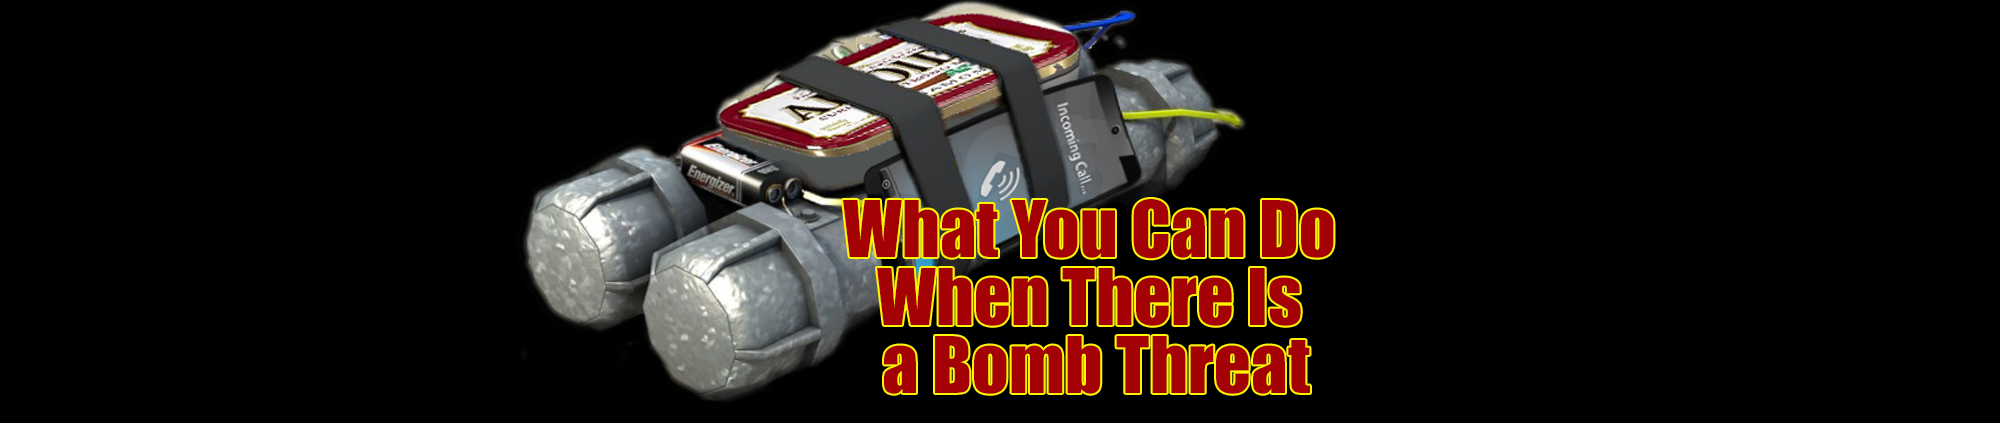 What you can do when there is a bomb theat...